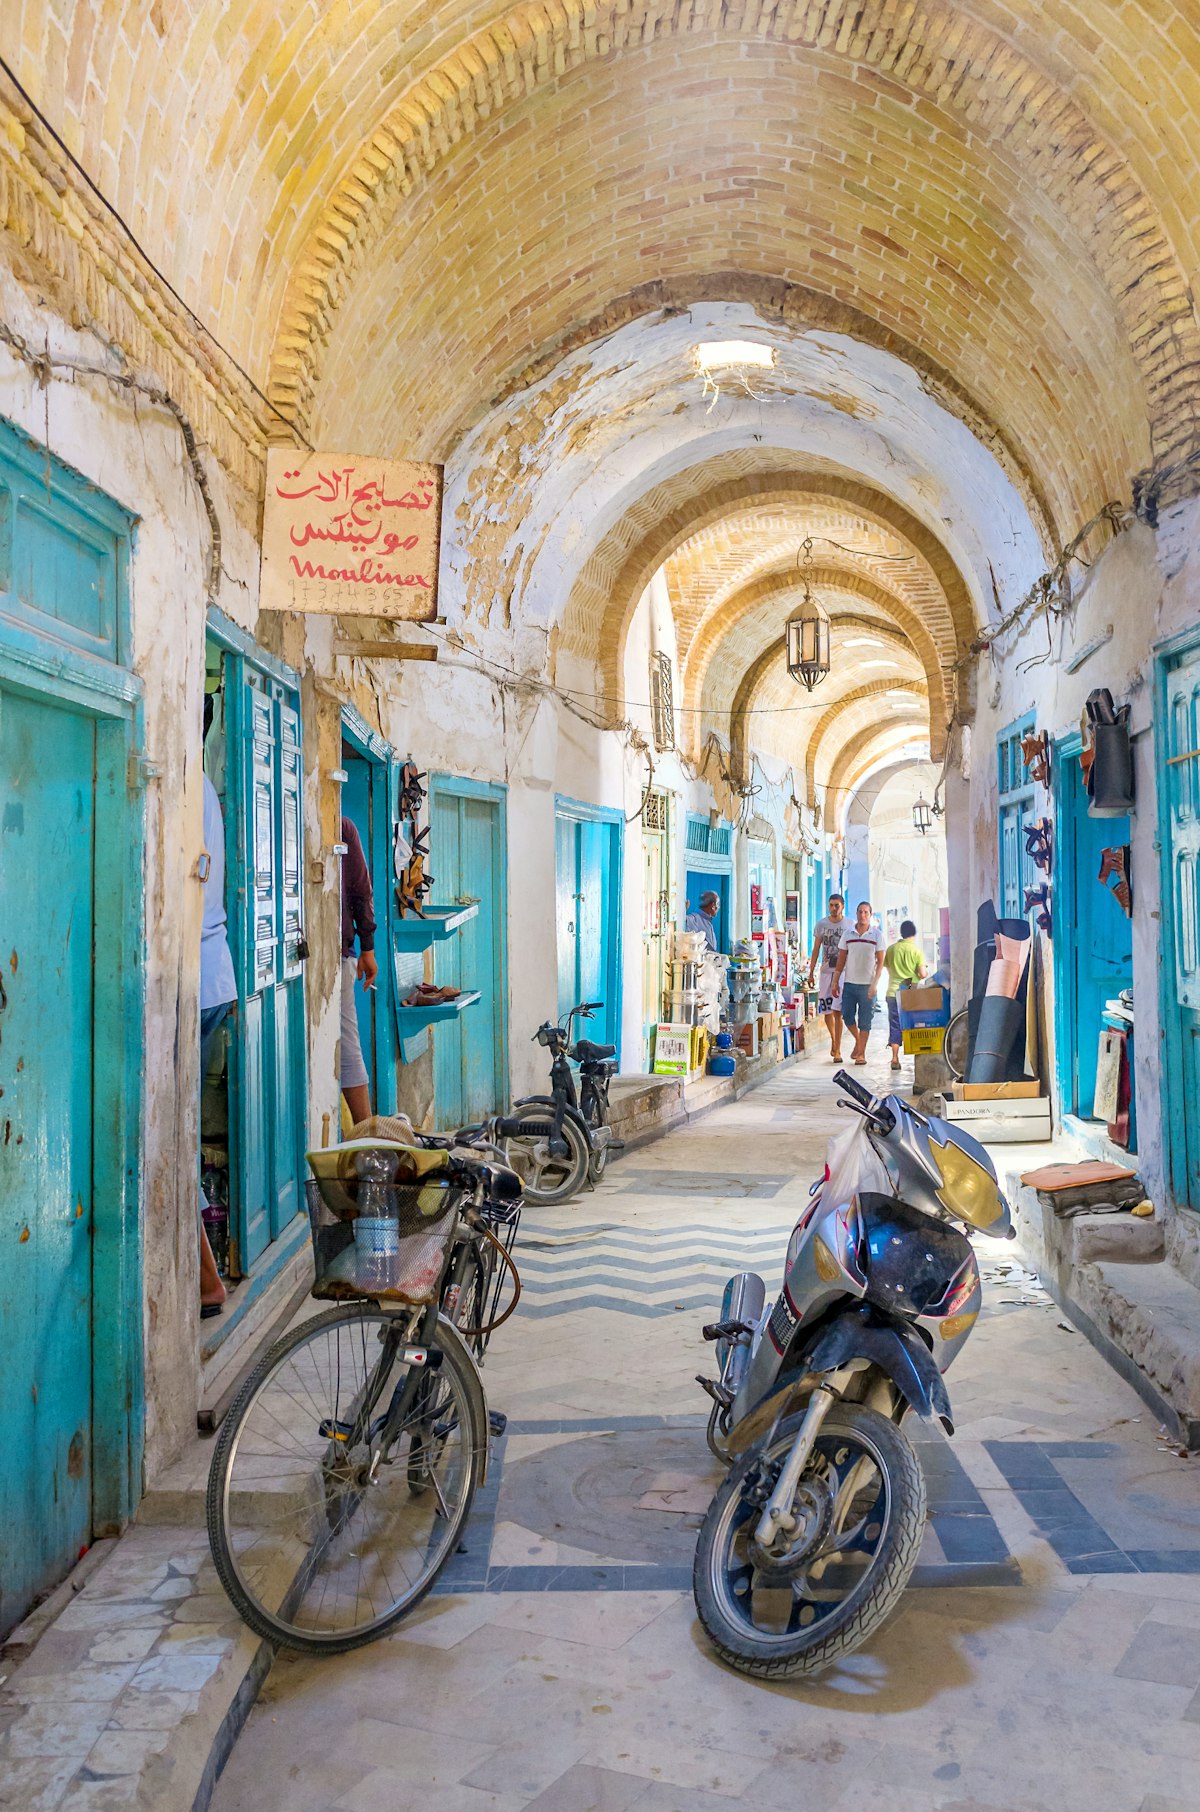 Kairouan, Tunisia - August 30, 2015: Almost all the stalls in Souq El-Blaghija market are closed after midday that's why it could be used as parking for cycles and scooters.